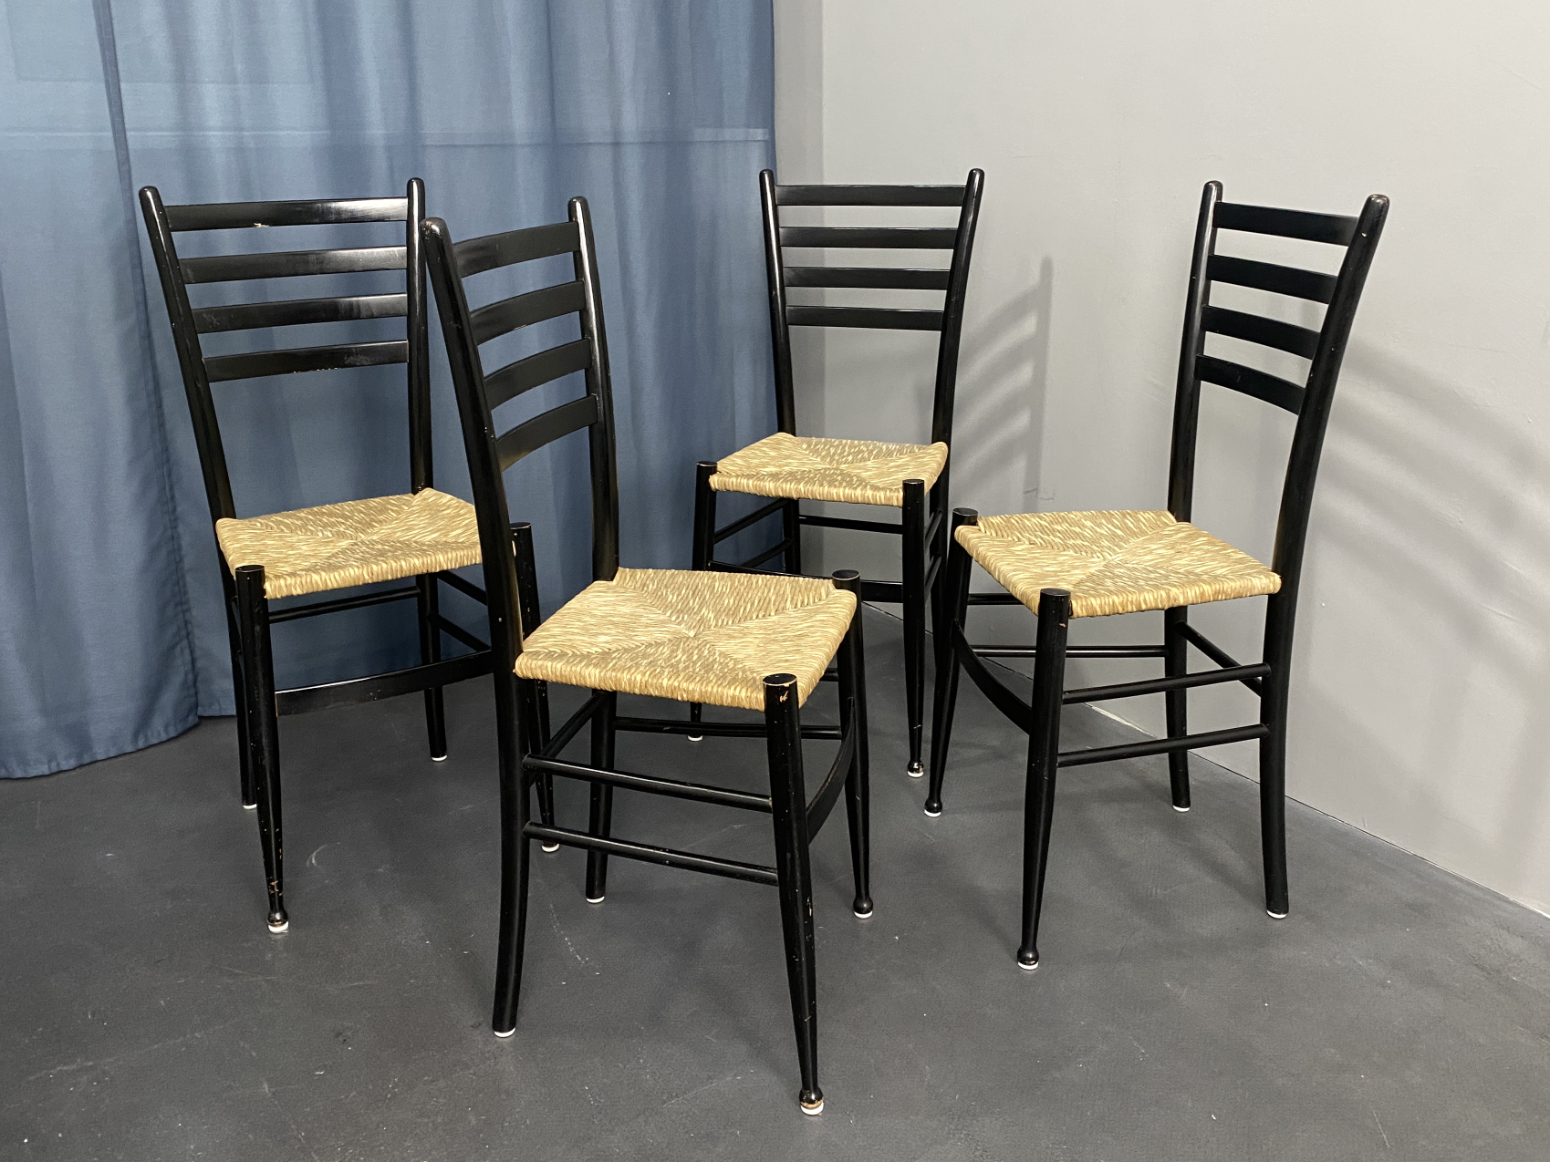 Set of 4 Black Spinetto Chairs by Chiavari, Bast Weave, Italy, 1950s